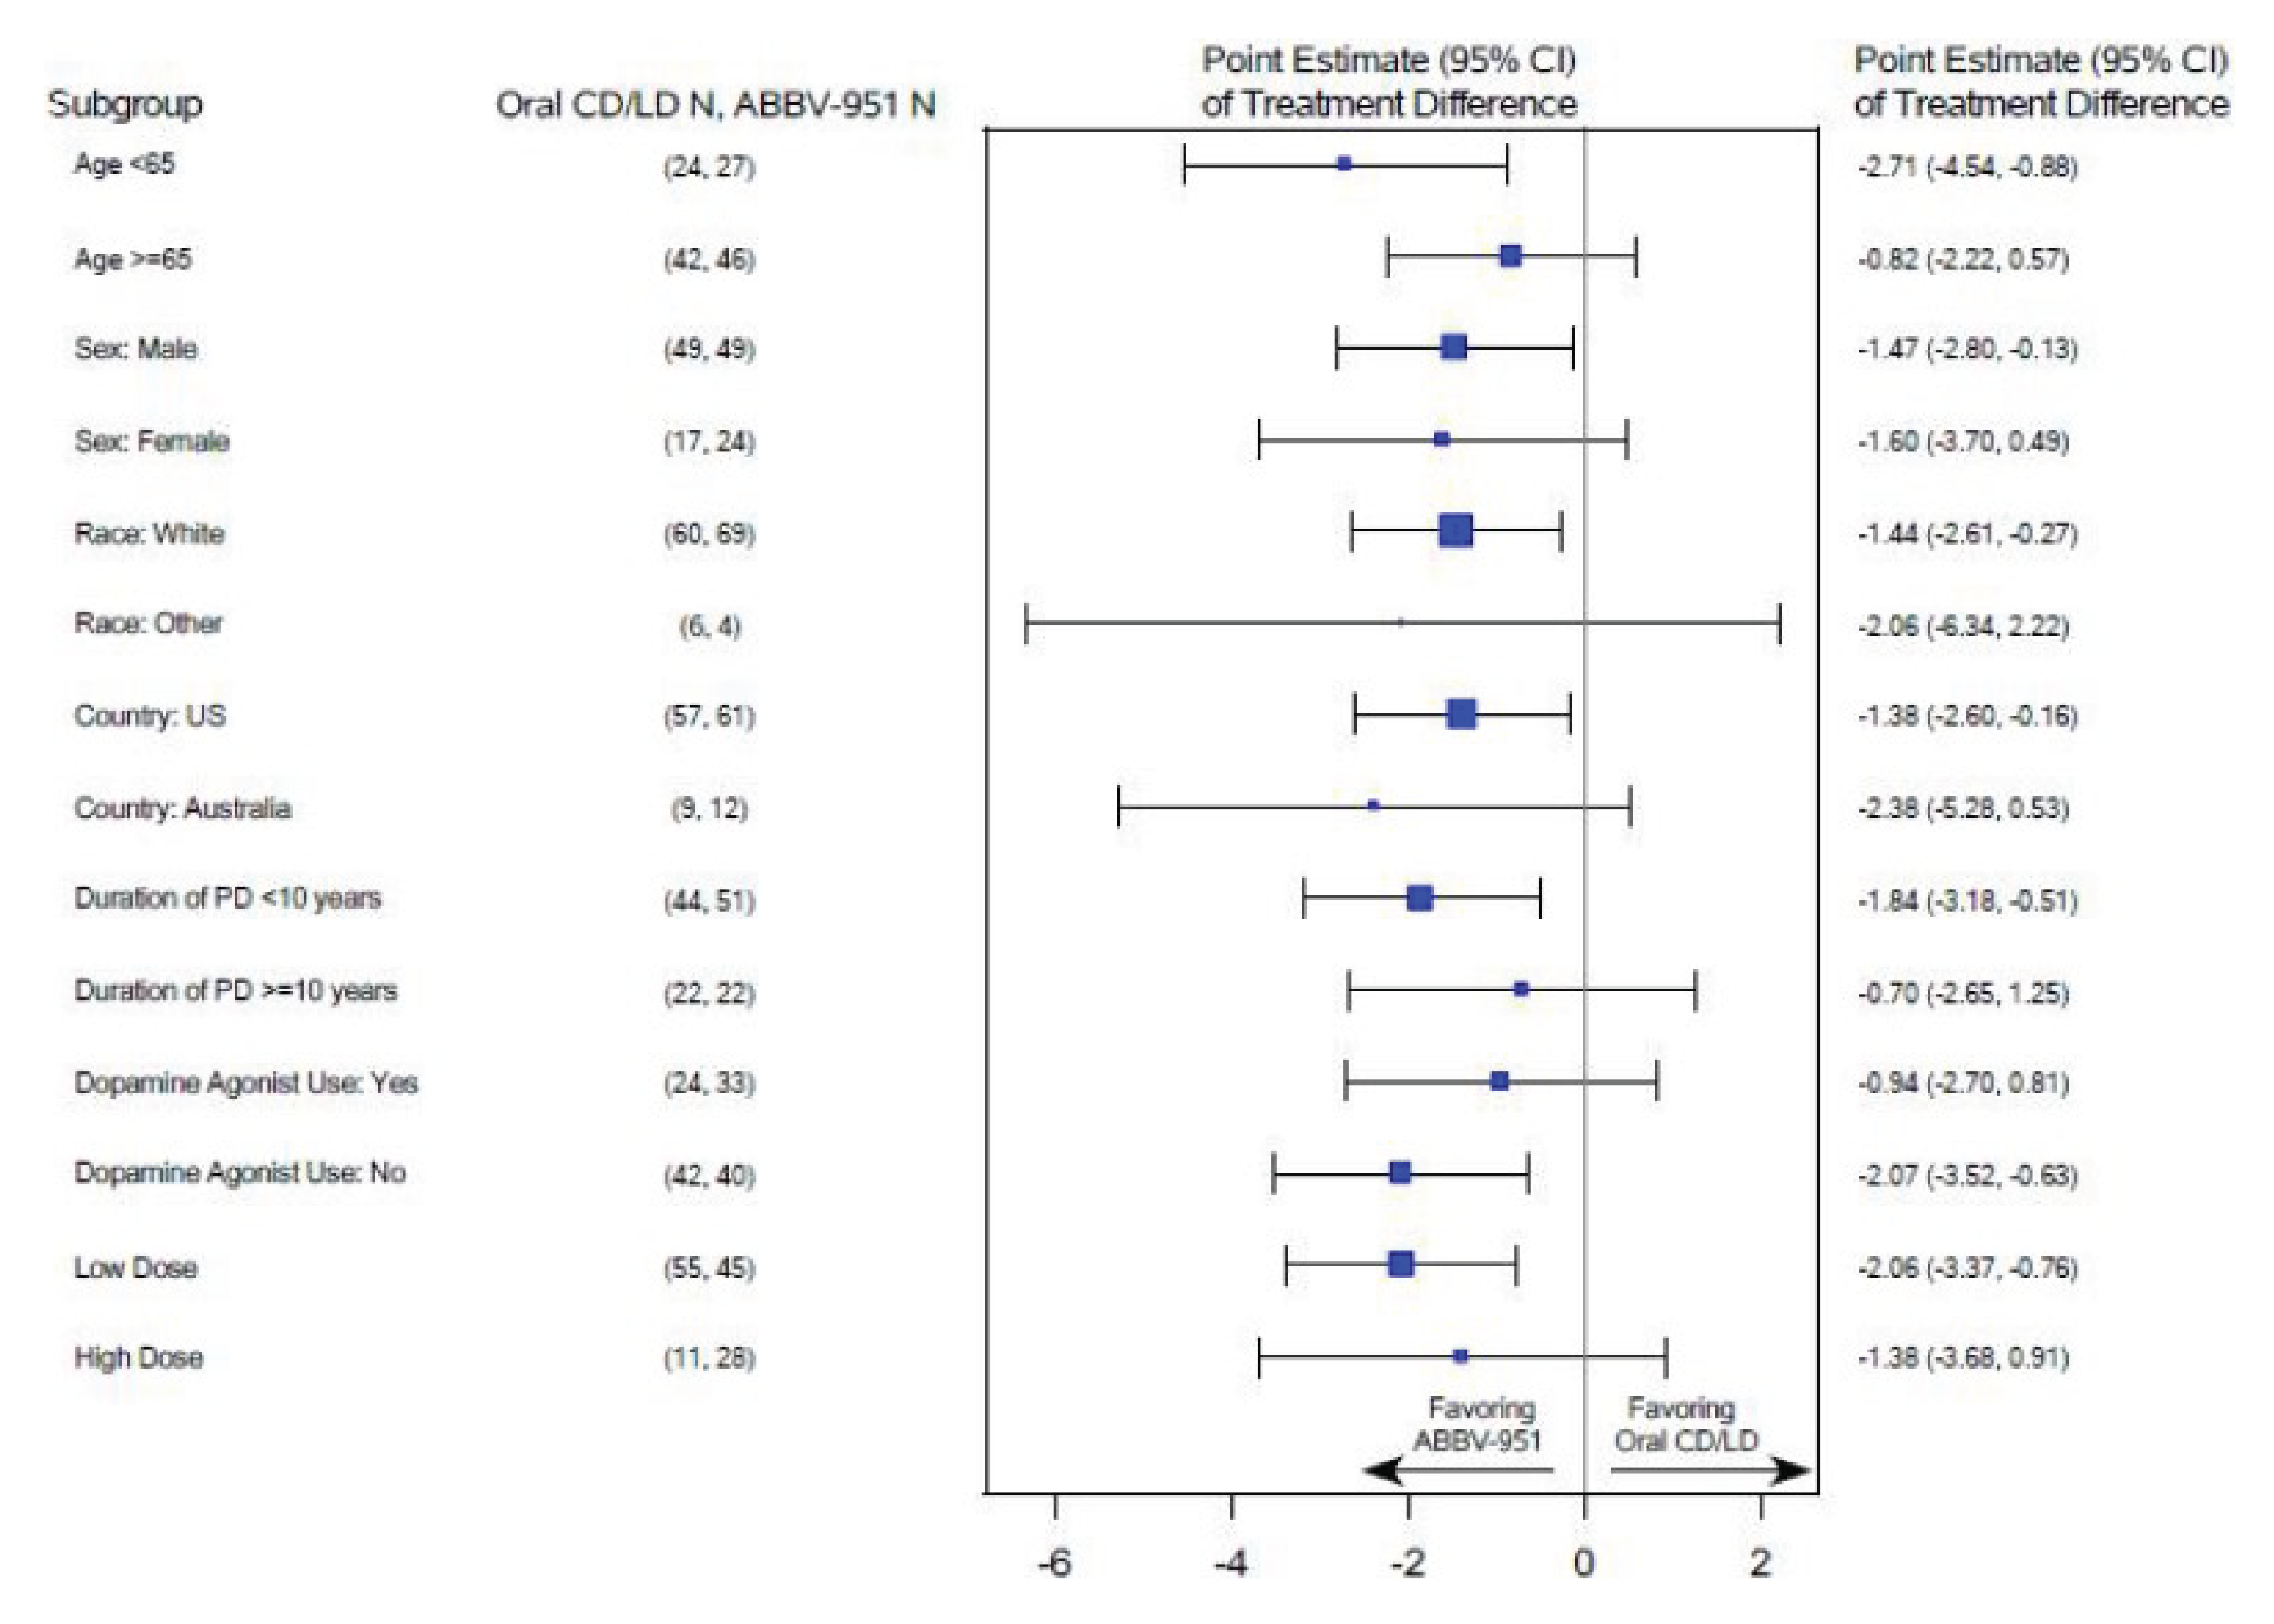 Subgroup analyses by age, gender, race, country, duration of PD, dopamine agonist use, and dose category of levodopa in the change from baseline average normalized “off” time in the M15-736 trial. Treatment effect estimates consistently favoured foslevodopa-foscarbidopa over oral LD-CD arm across all subgroups. The 95% confidence interval crossed 0 in certain subgroups (aged at least 65 years, female, race that is not white, living in Australia, duration of PD diagnosis at least 10 years, subgroup with dopamine agonist use, and high levodopa dose category).